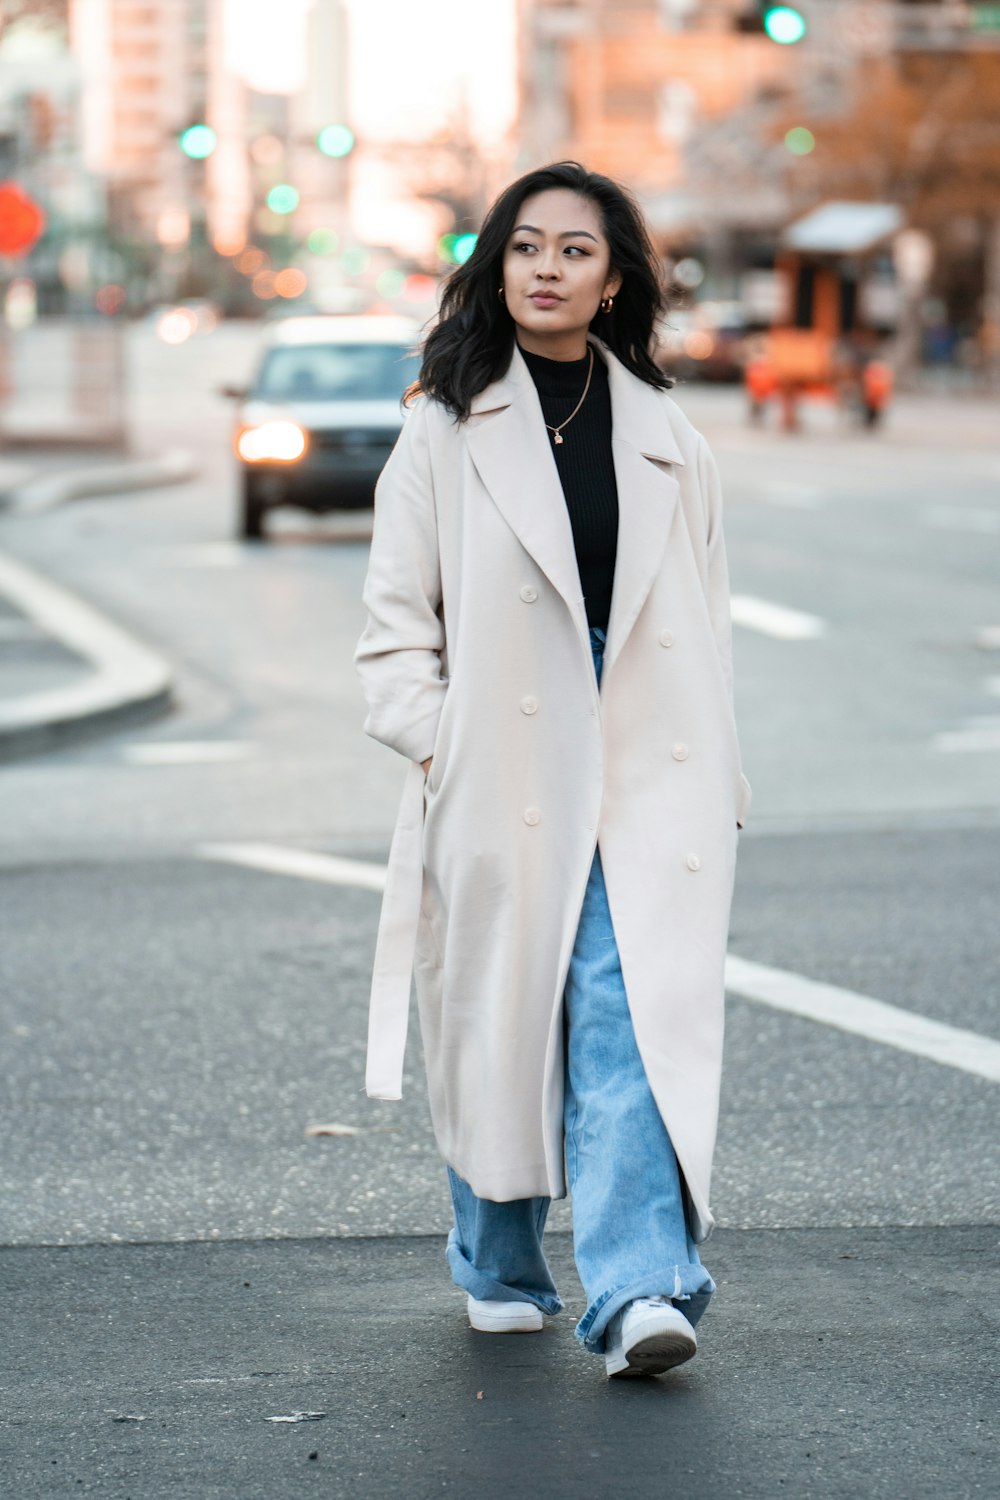 woman in white coat and blue denim jeans standing on road during daytime